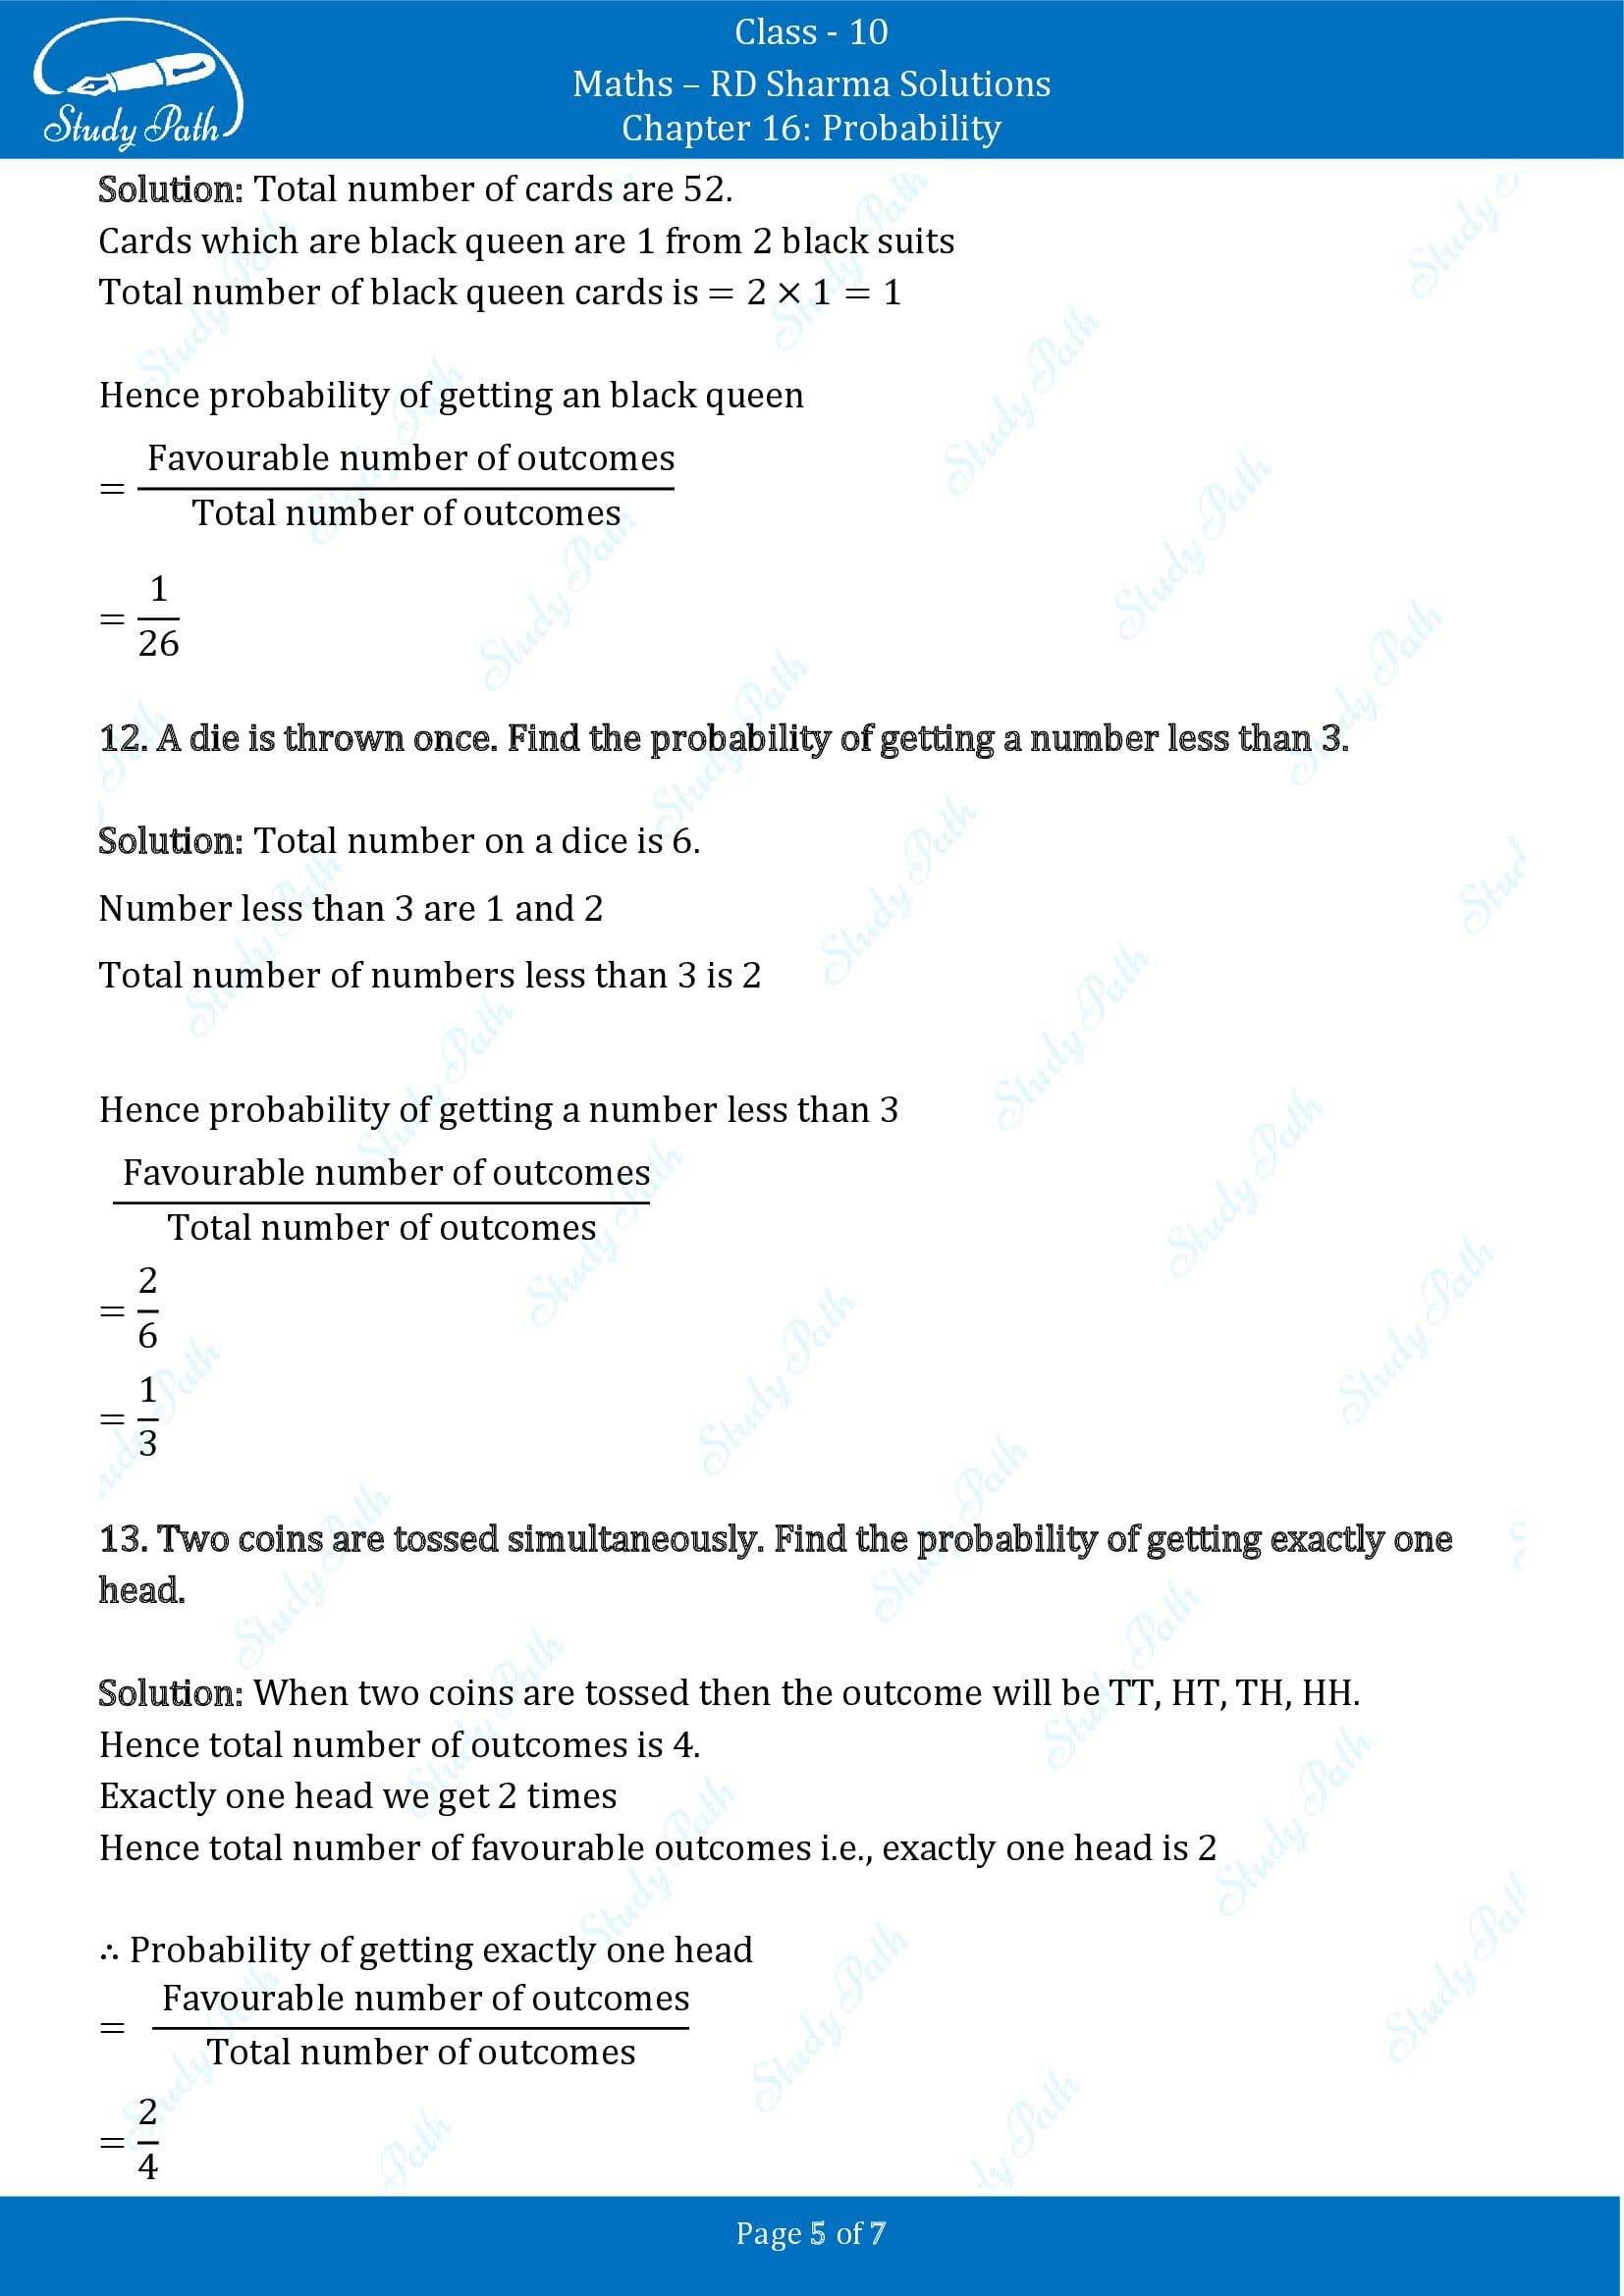 RD Sharma Solutions Class 10 Chapter 16 Probability Very Short Answer Type Questions VSAQs 00005